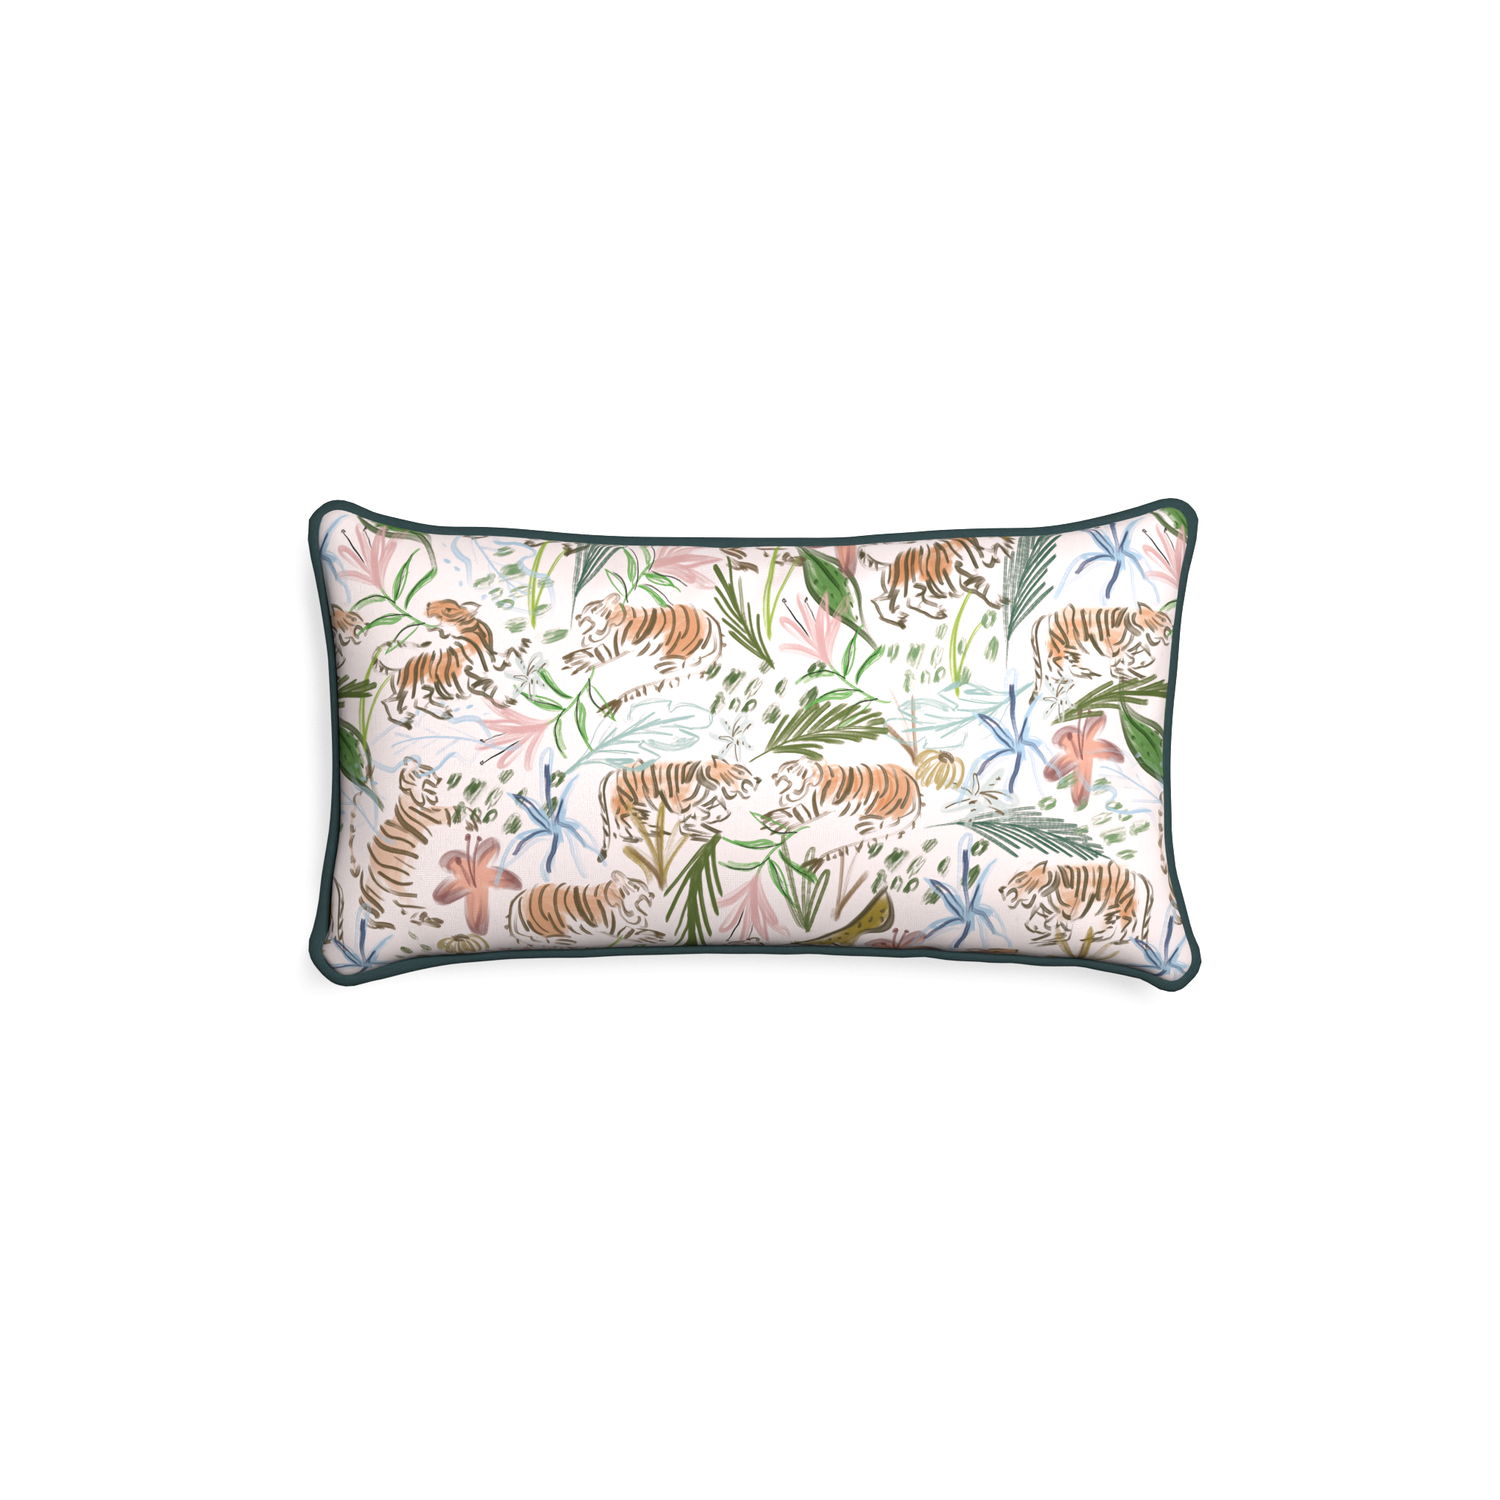 Petite-lumbar frida pink custom pink chinoiserie tigerpillow with p piping on white background